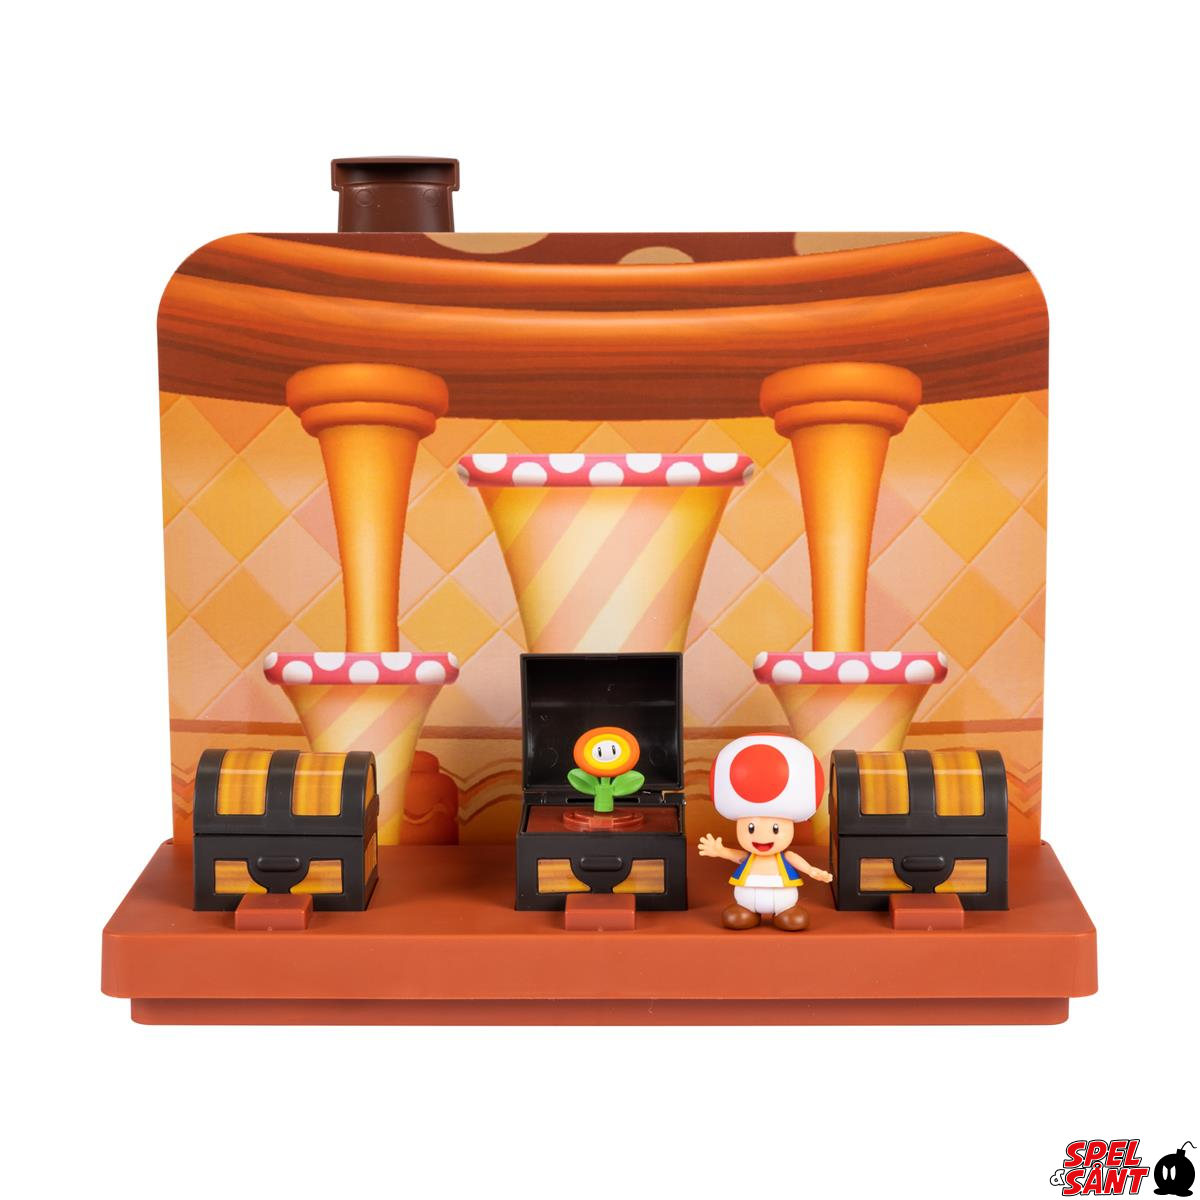 World Of Nintendo Super Mario Deluxe Toad House Playset Spel And Sånt The Video Game Store With 9094